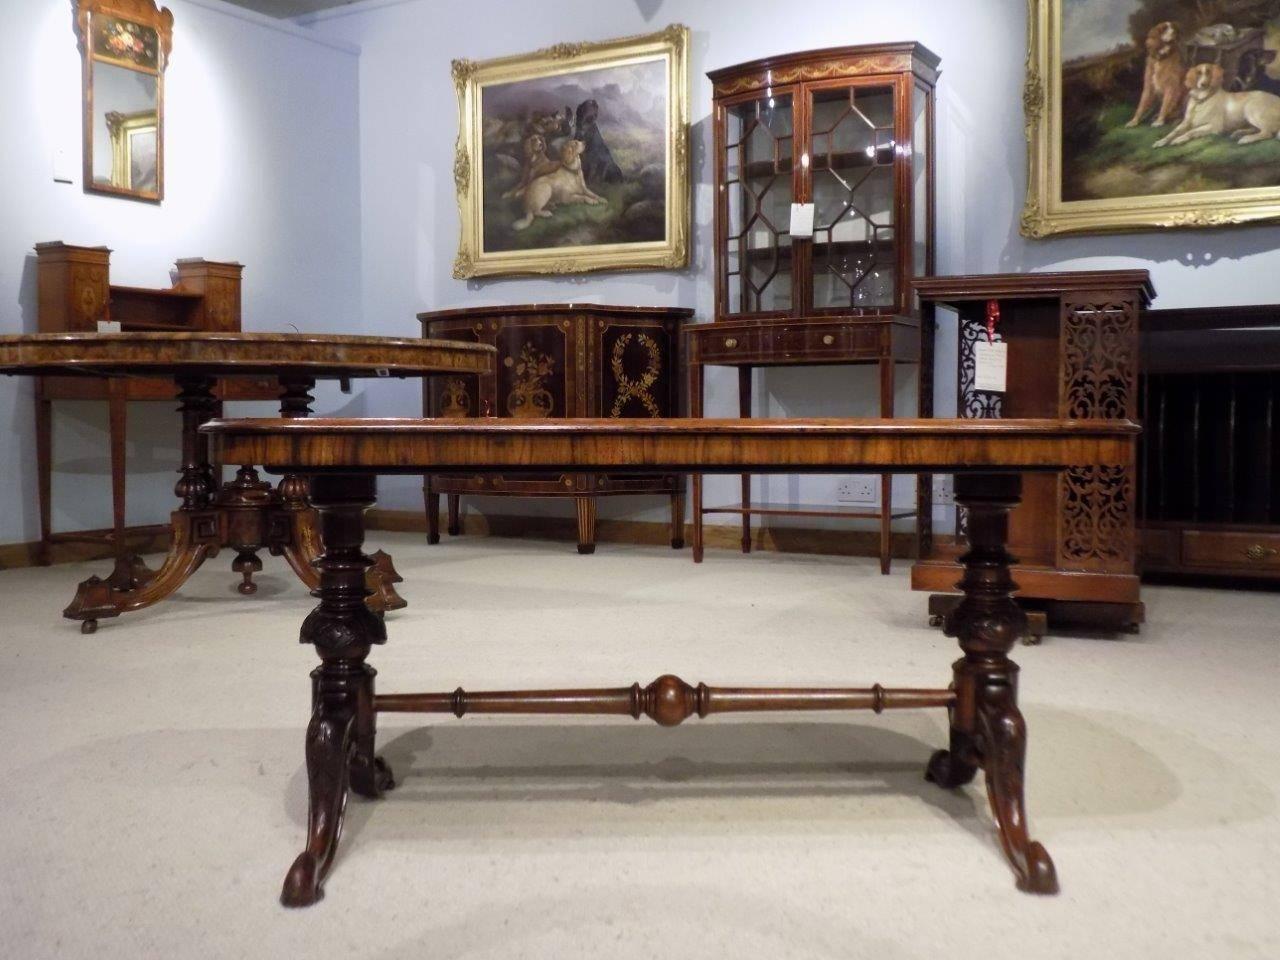 A superb quality burr walnut Victorian antique coffee table. Having a rectangular top with rounded corners veneered in beautifully figured burr walnut and supported on turned and finely carved columns, with acanthus carved swept supports and pad